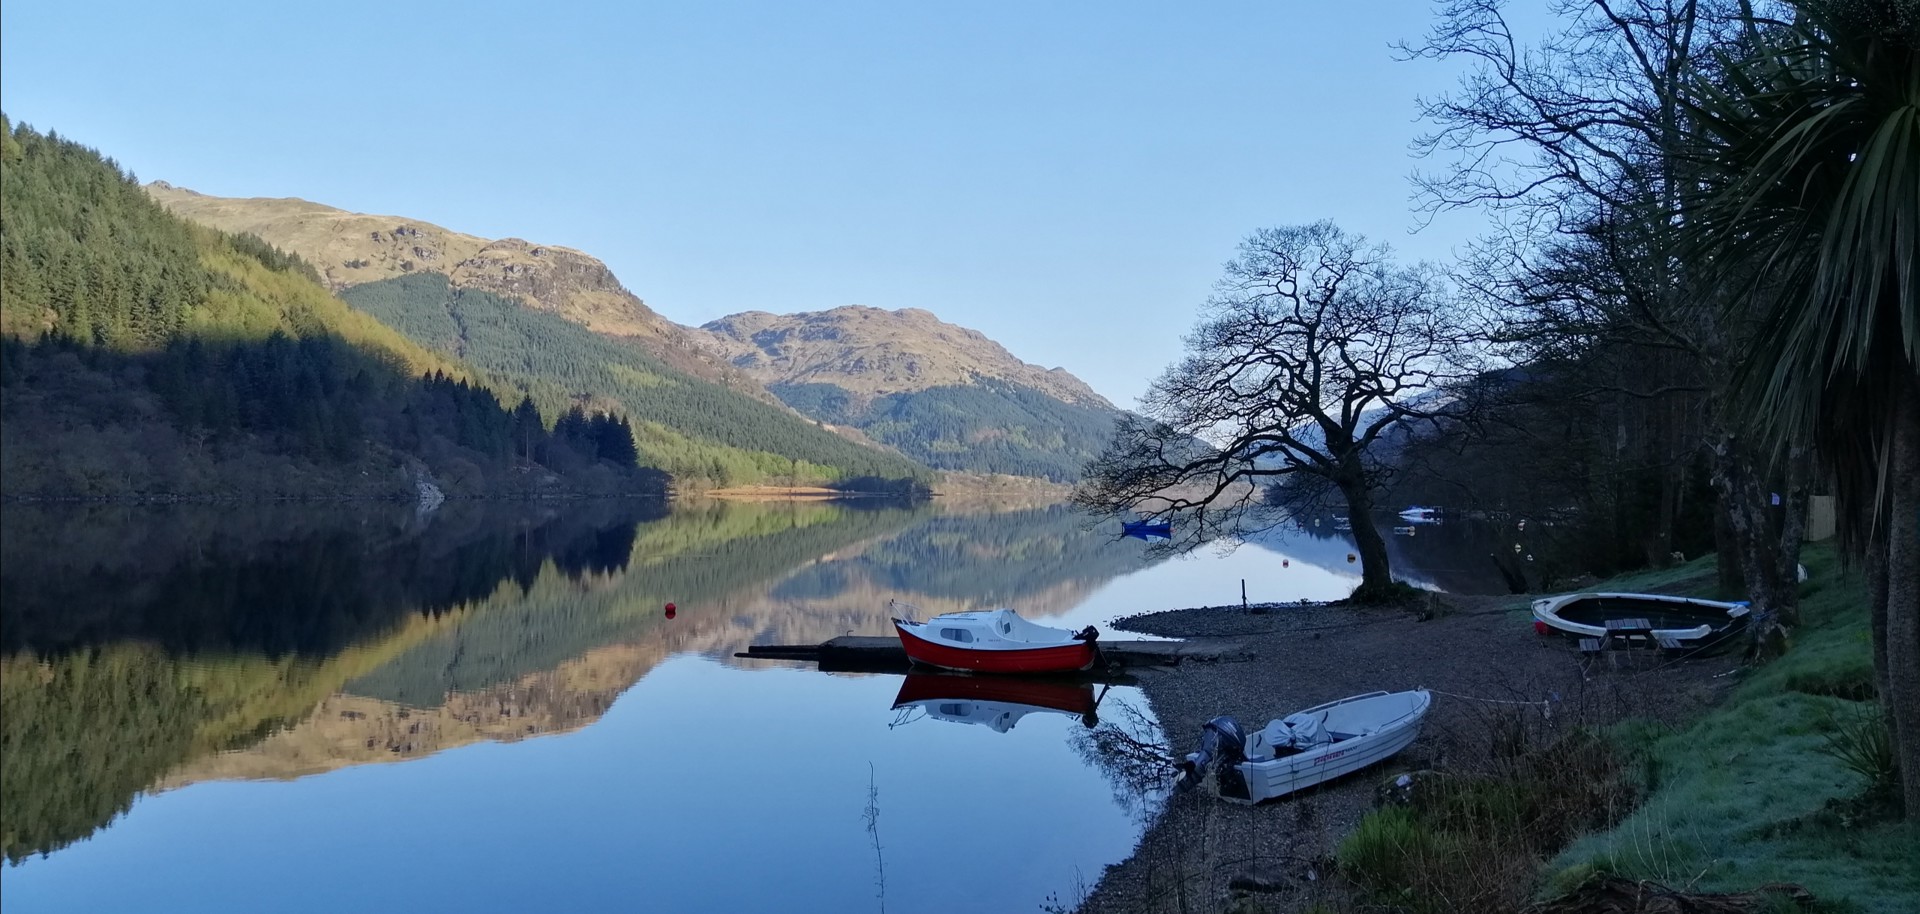 Background image - COWAL FEST Loch Eck